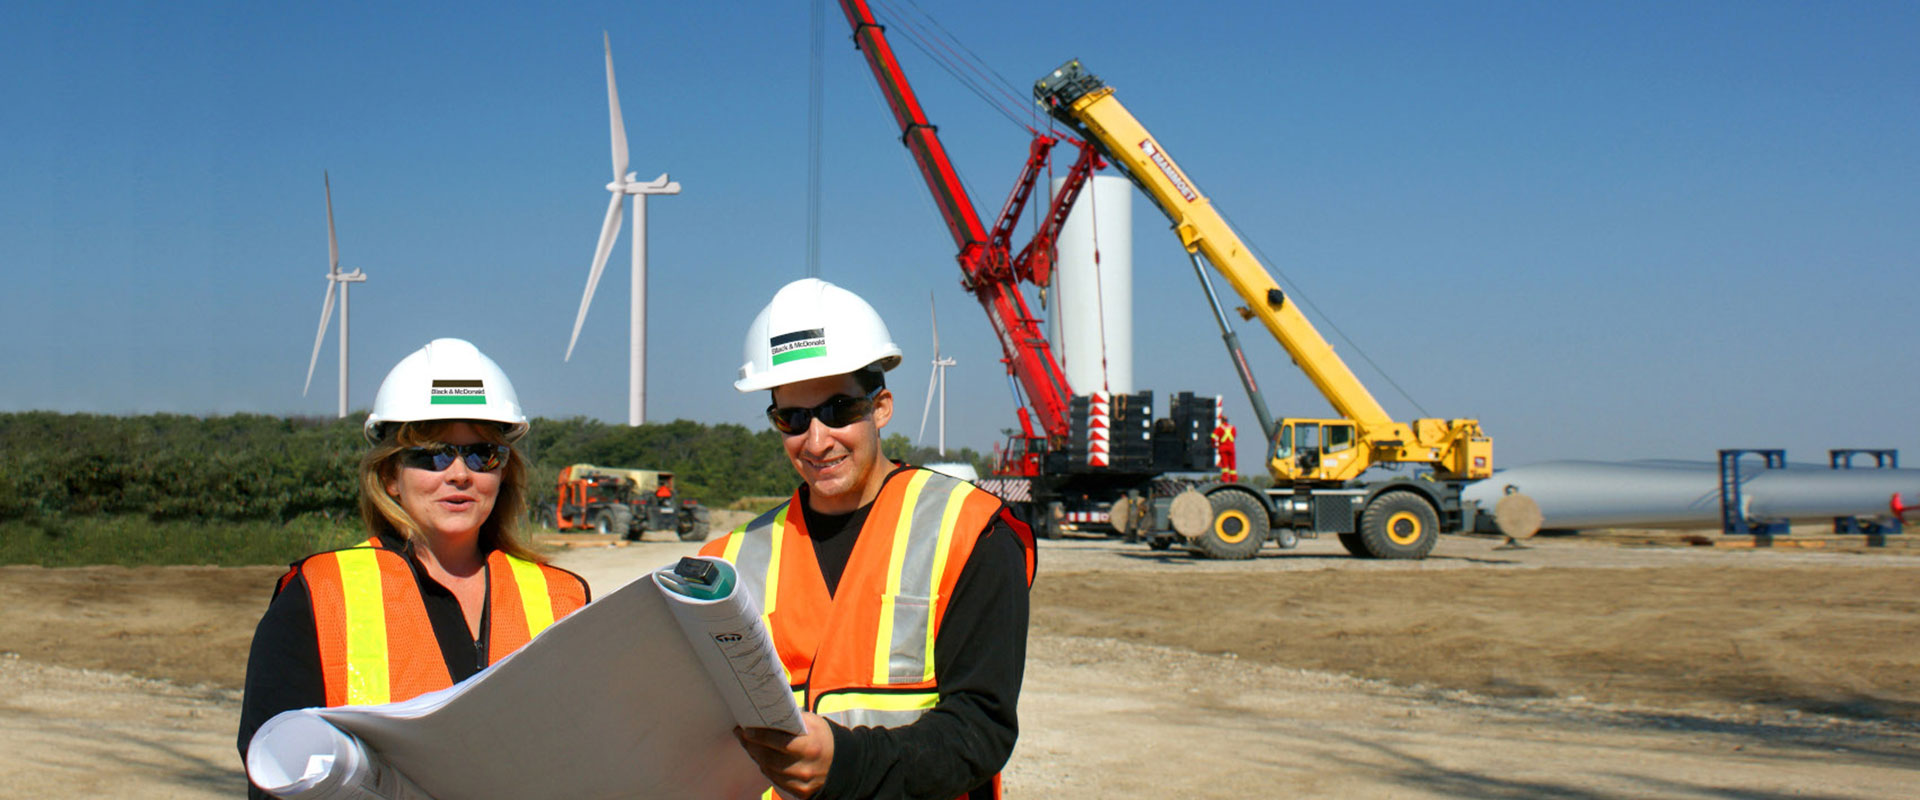 B&M construction project team discussing a wind farm project in the field